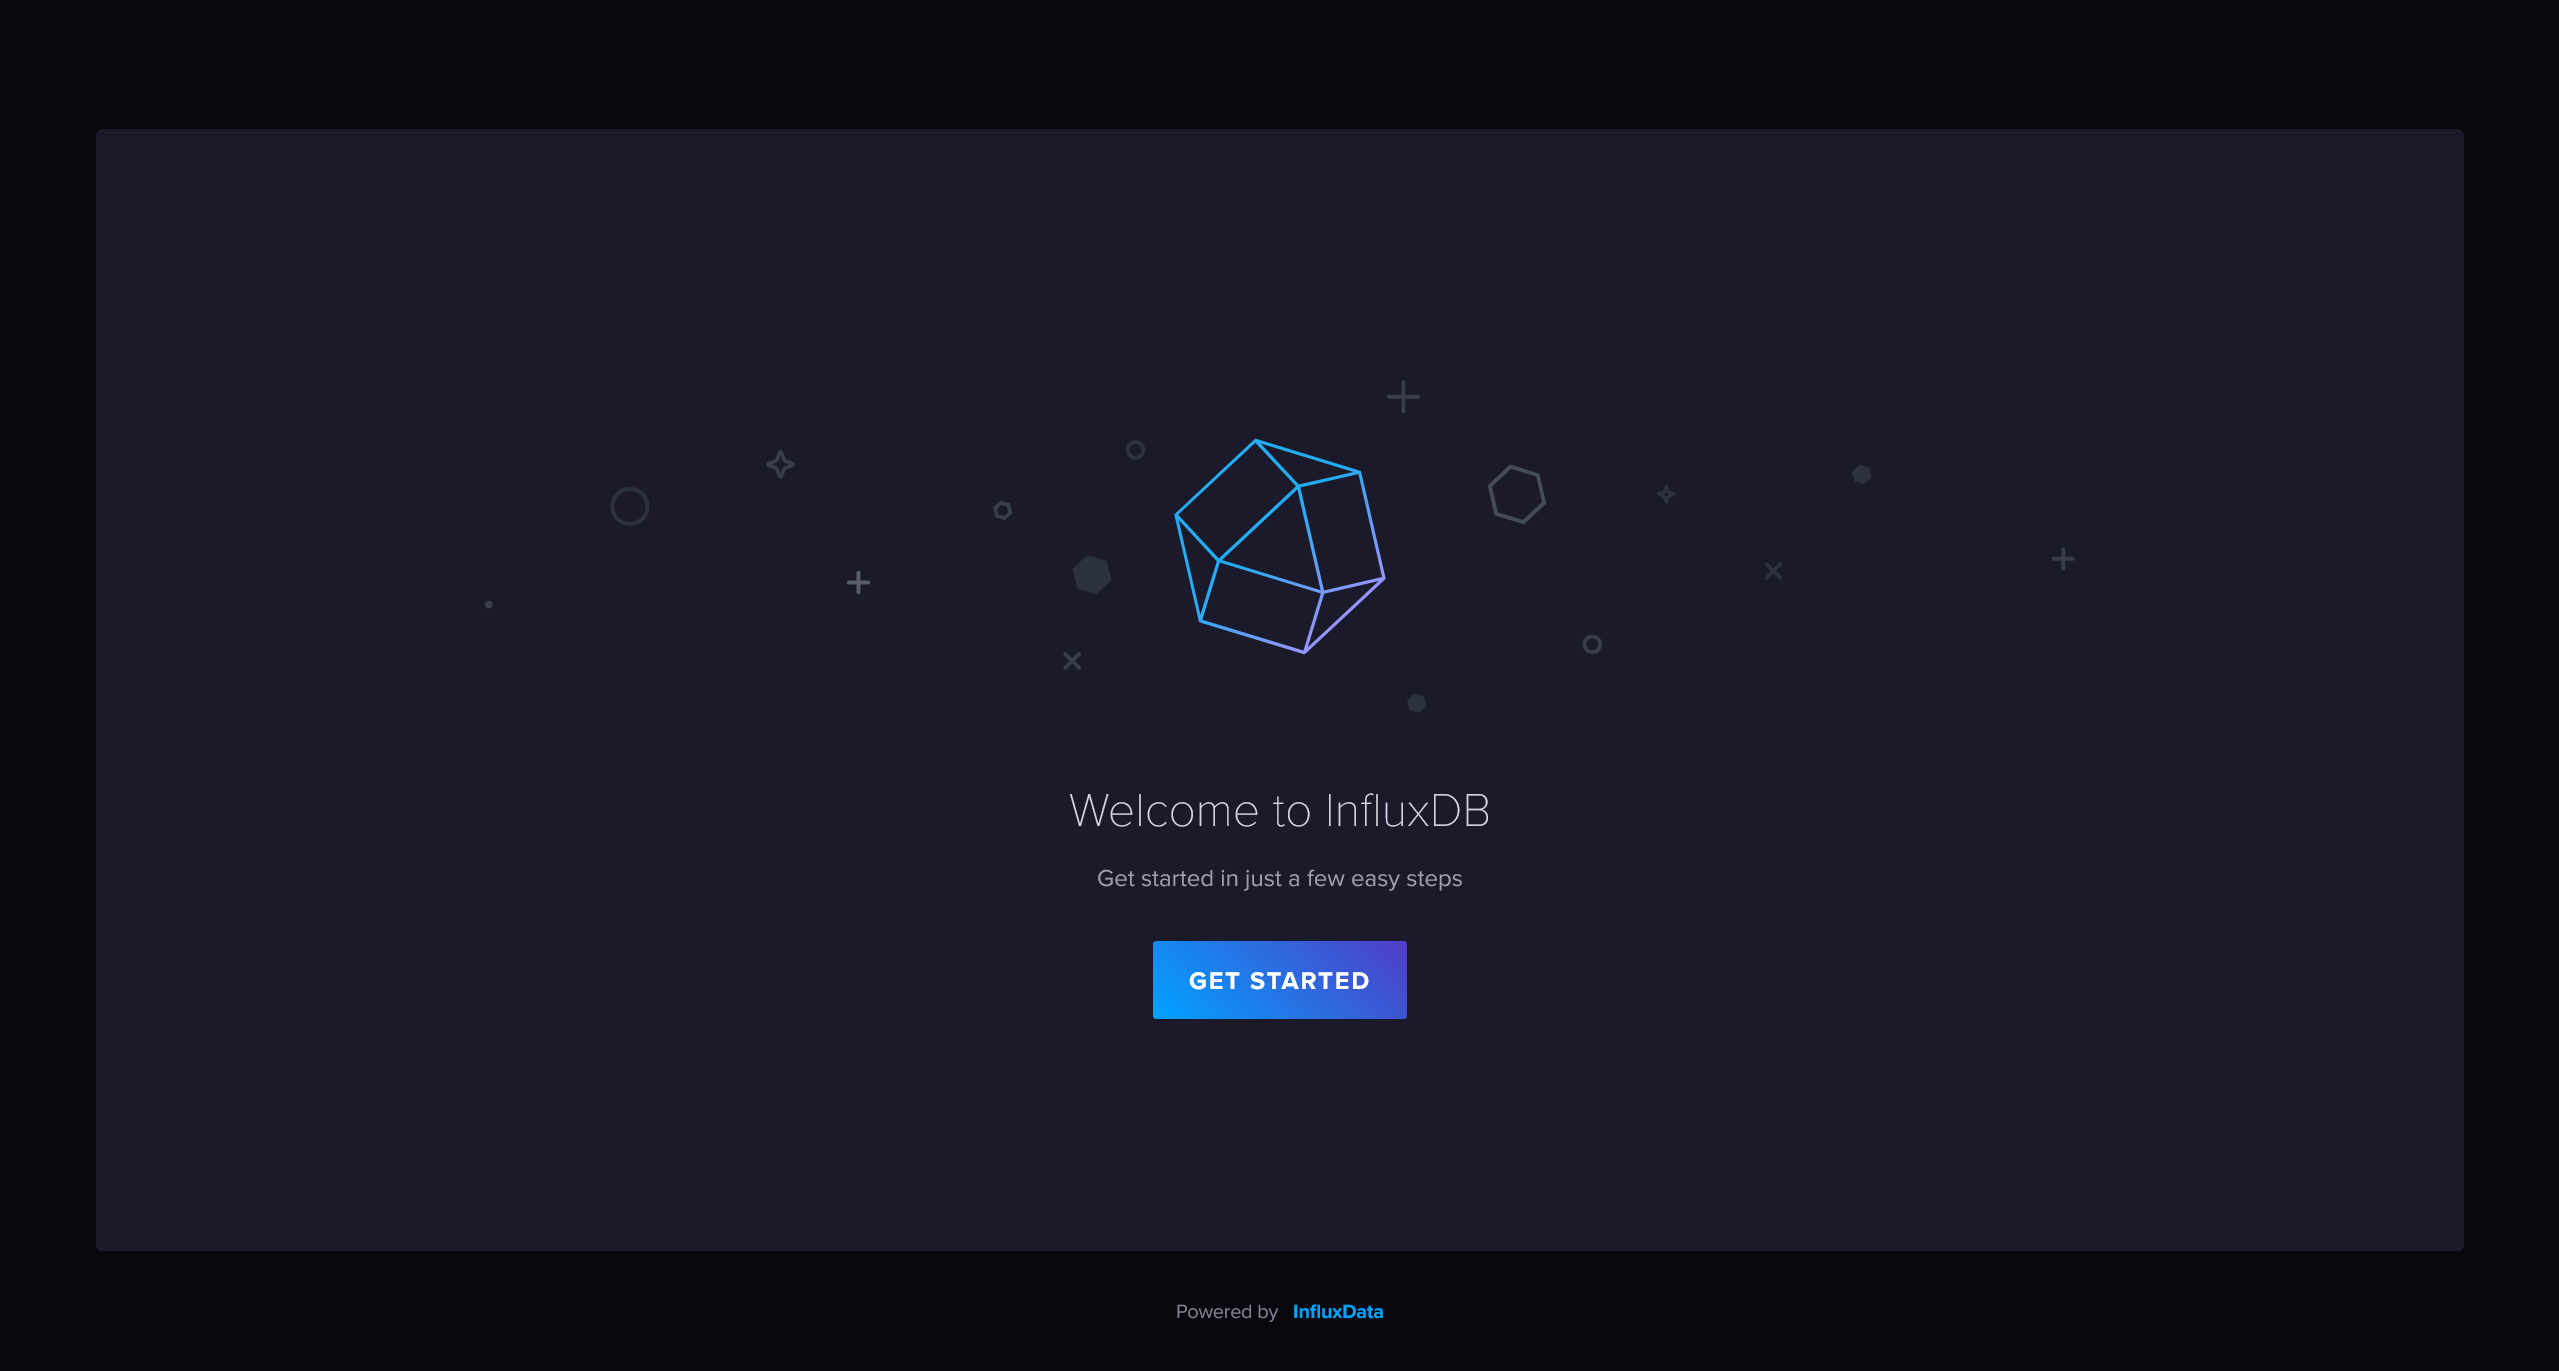 Welcome to InfluxDB